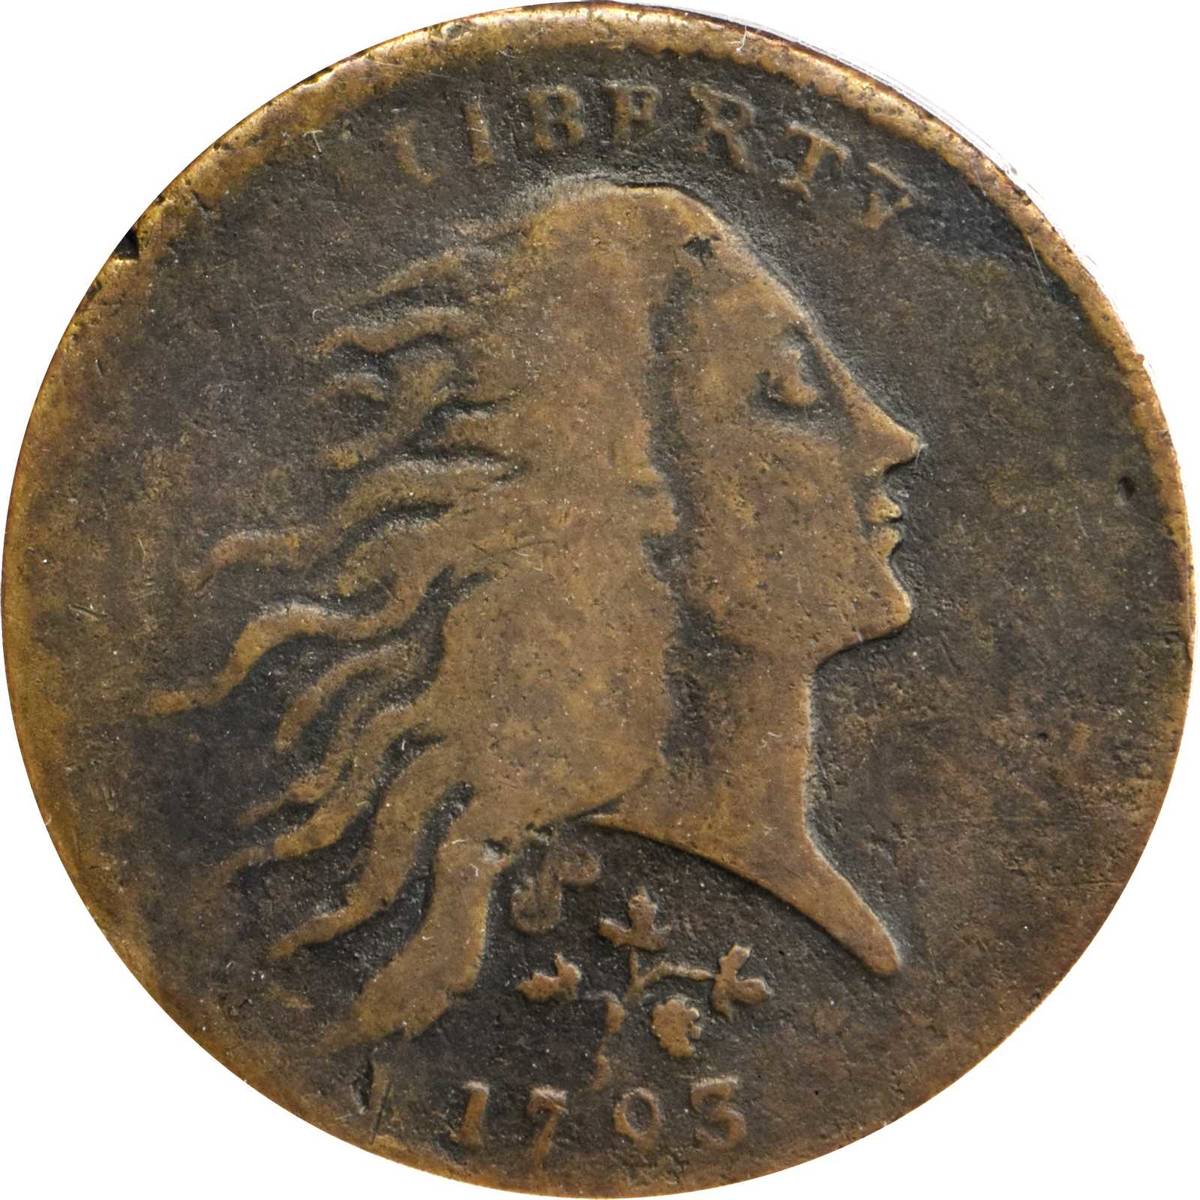 This 1793 Strawberry Leaf cent sold for $660,000 at an auction at Bellagio on Aug. 6, 2020. (Co ...